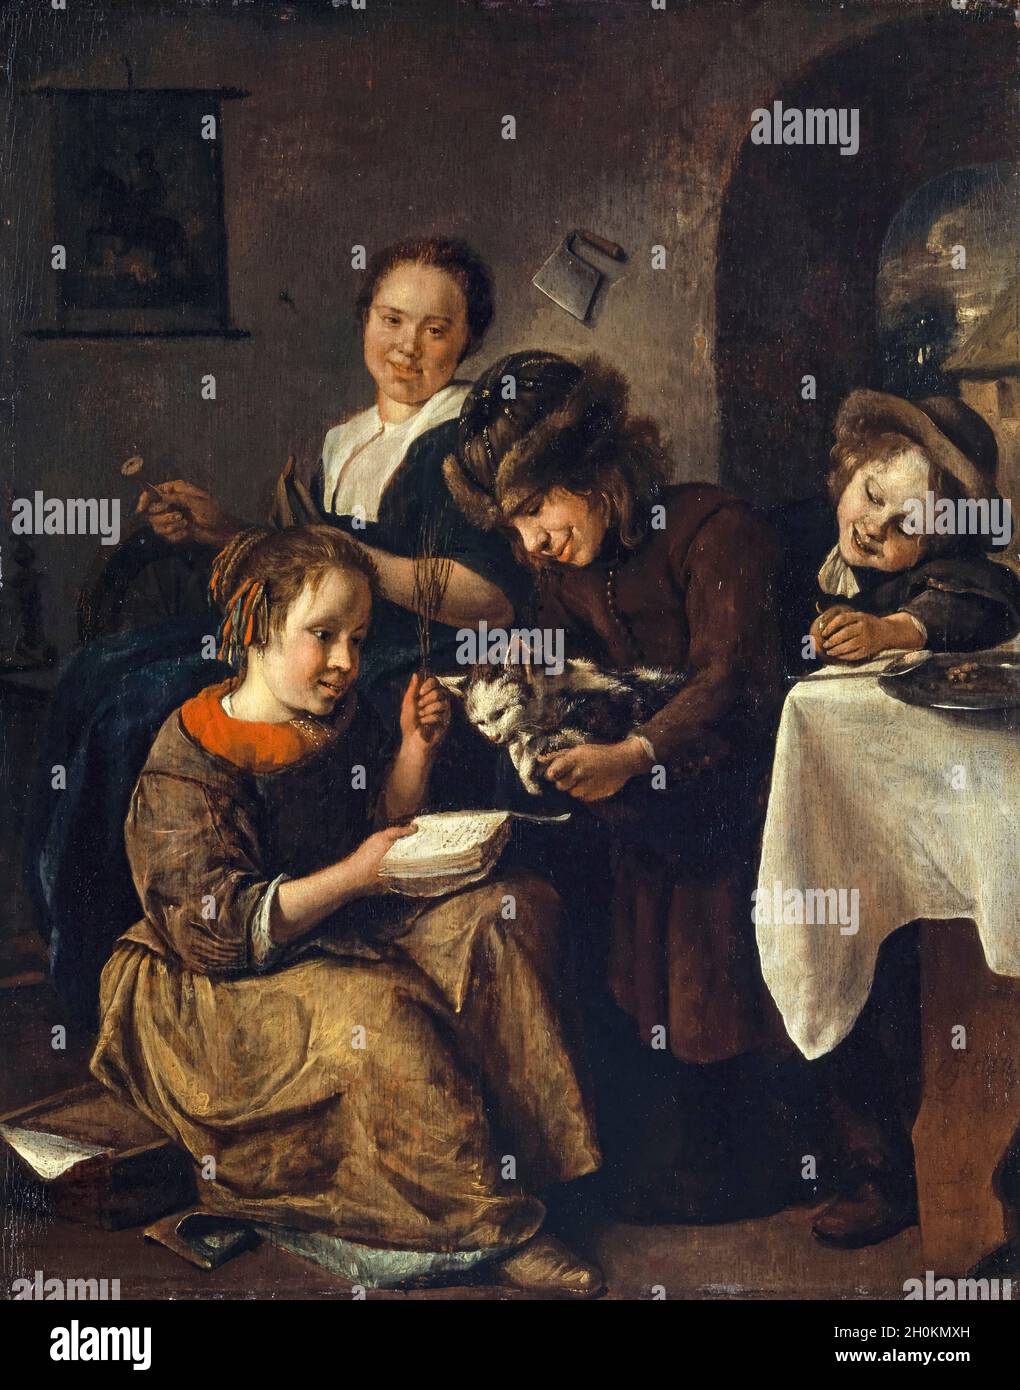 Jan Steen, Children teaching a cat to read, painting, 1665-1668 Stock Photo